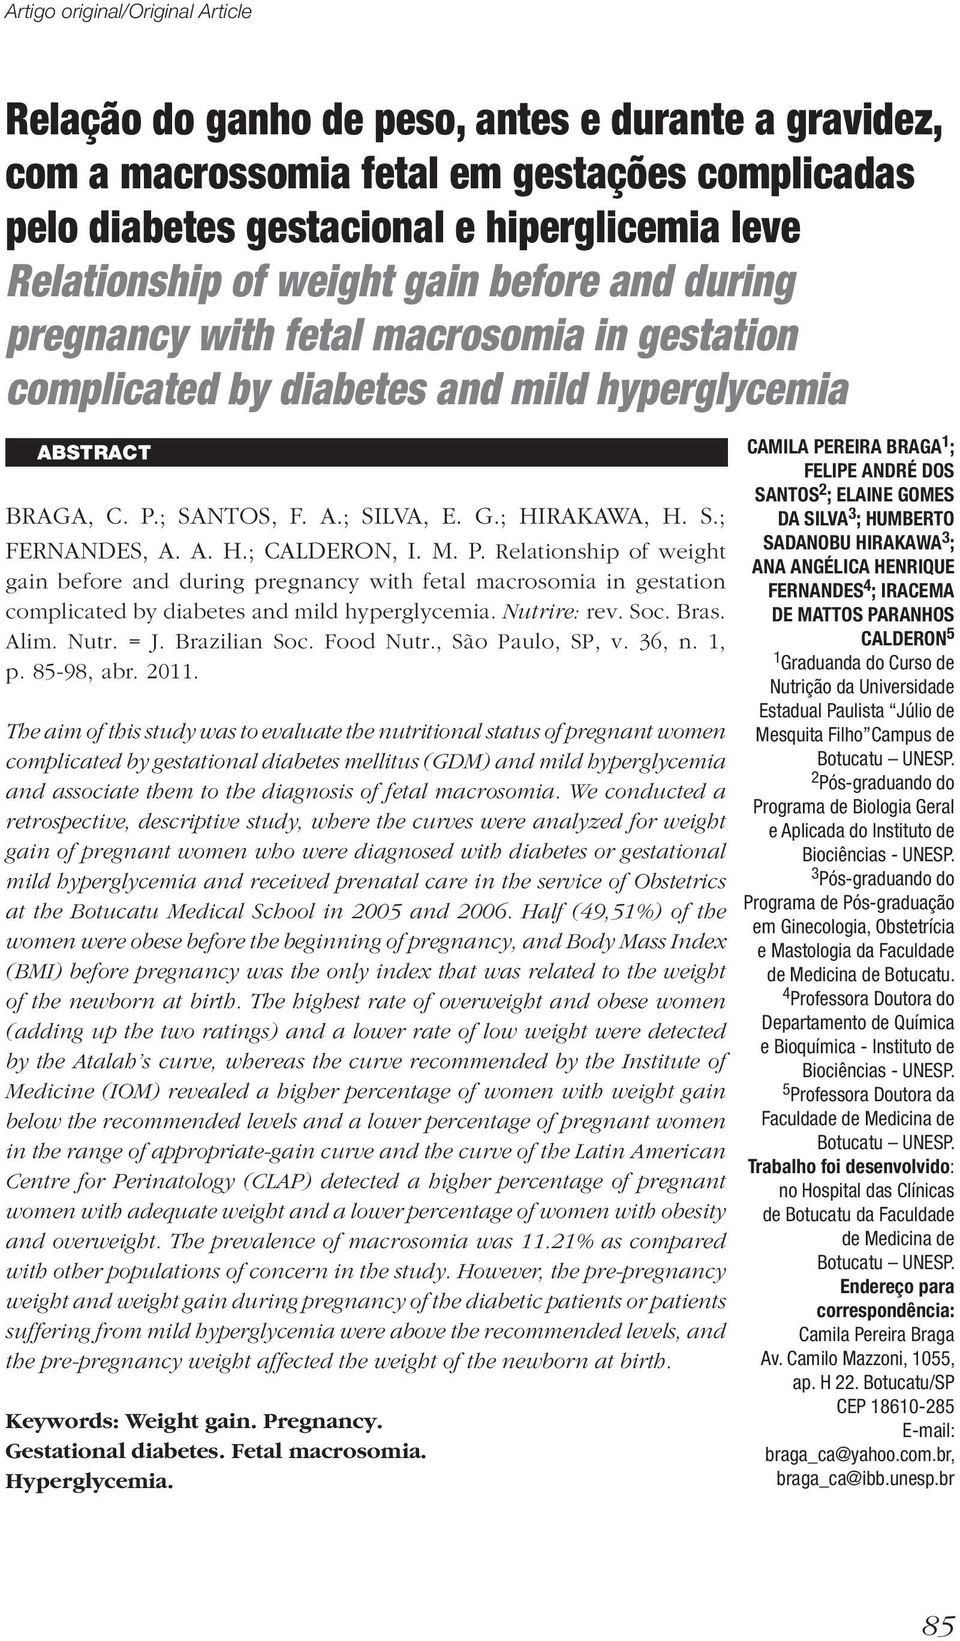 A. H.; CALDERON, I. M. P. Relationship of weight gain before and during pregnancy with fetal macrosomia in gestation complicated by diabetes and mild hyperglycemia. Nutrire: rev. Soc. Bras. Alim.